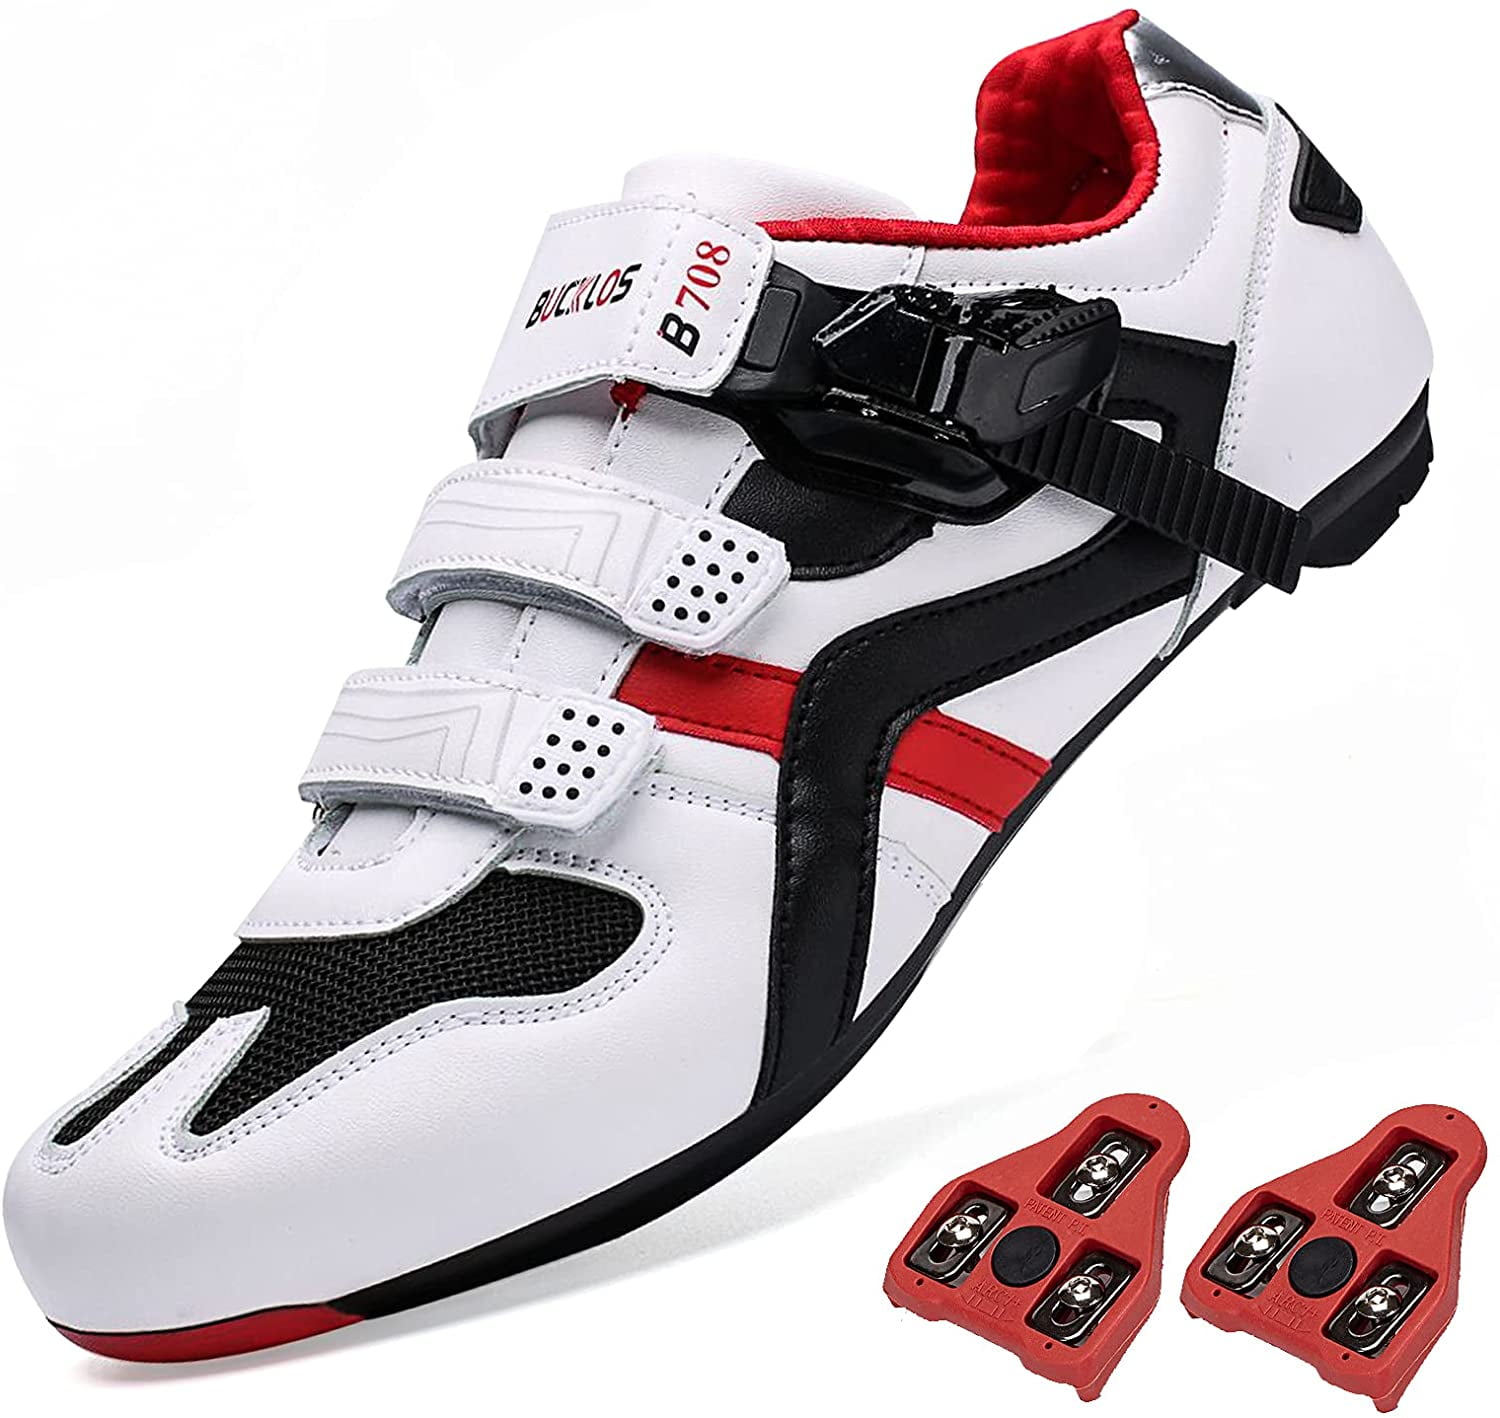 Unisex Outdoor Road Racing Cycling Shoes SPD-SL Look Delta Cleat Bicycle Sneaker 